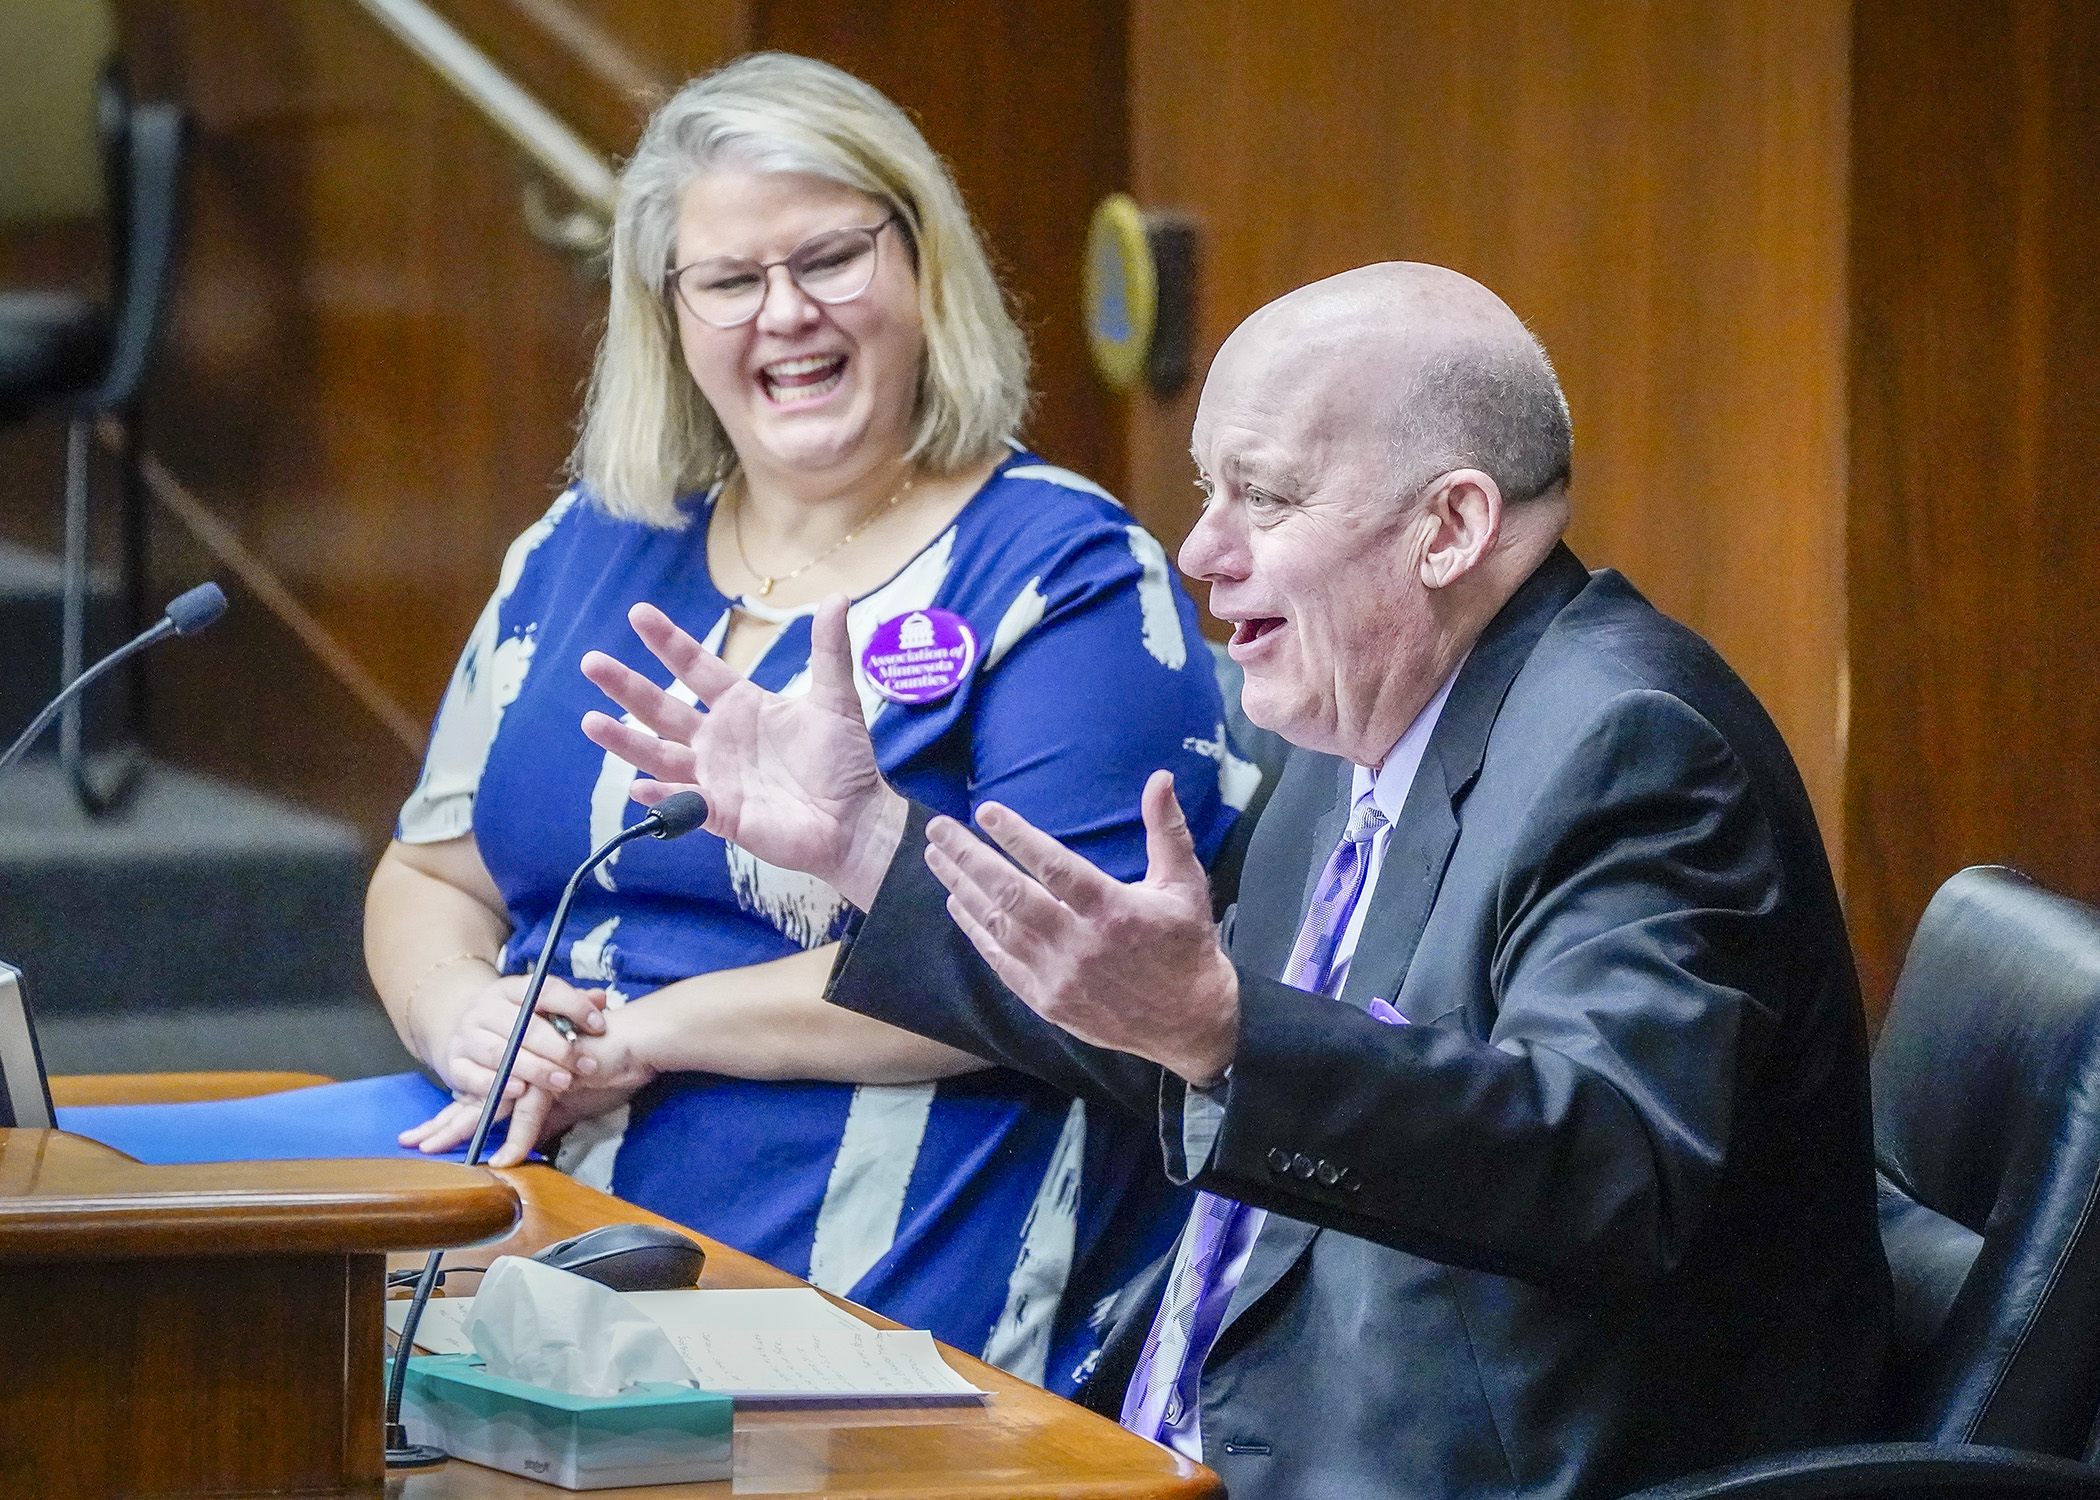 St. Louis County Commissioners Annie Harala and Paul McDonald provide animated testimony before the House Property Tax Division Feb. 21 during a discussion on implementation of new local government aid. (Photo by Andrew VonBank)